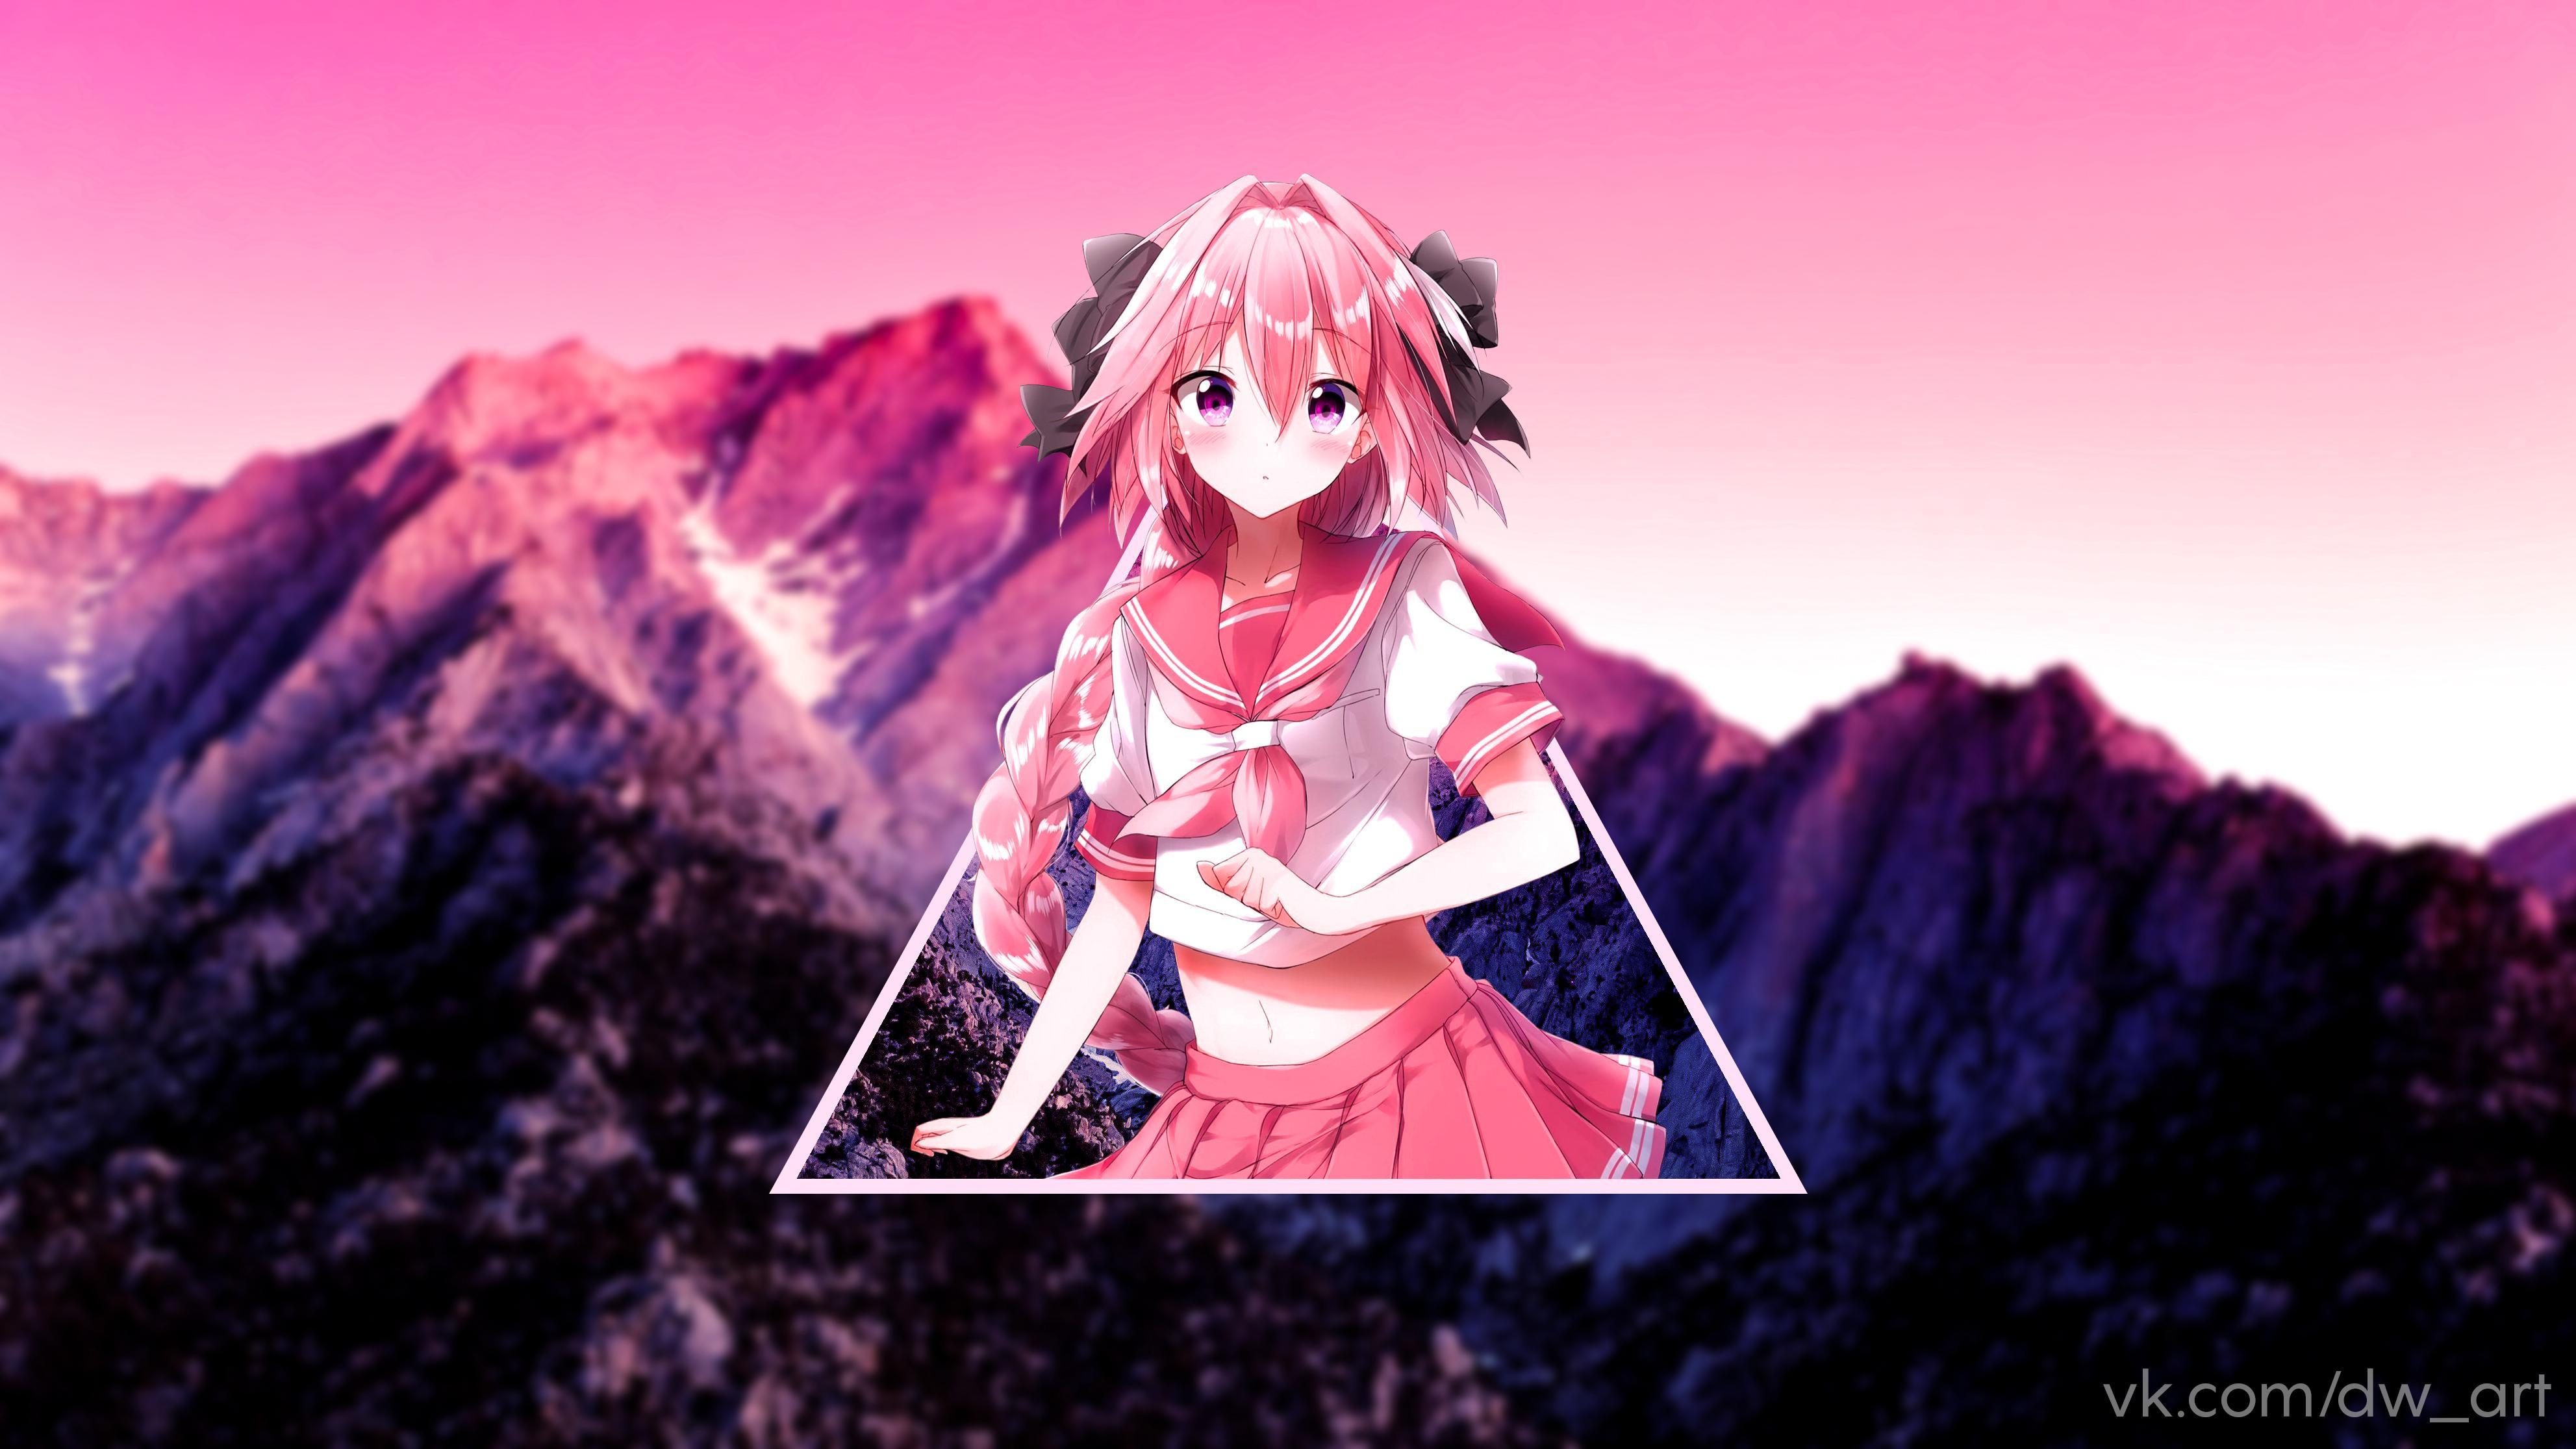 406628 Astolfo (Fate/Apocrypha), Fate/Apocrypha, school, Astolfo, anime  girl, anime, traps wallpaper download, 2120x3000 - Rare Gallery HD  Wallpapers